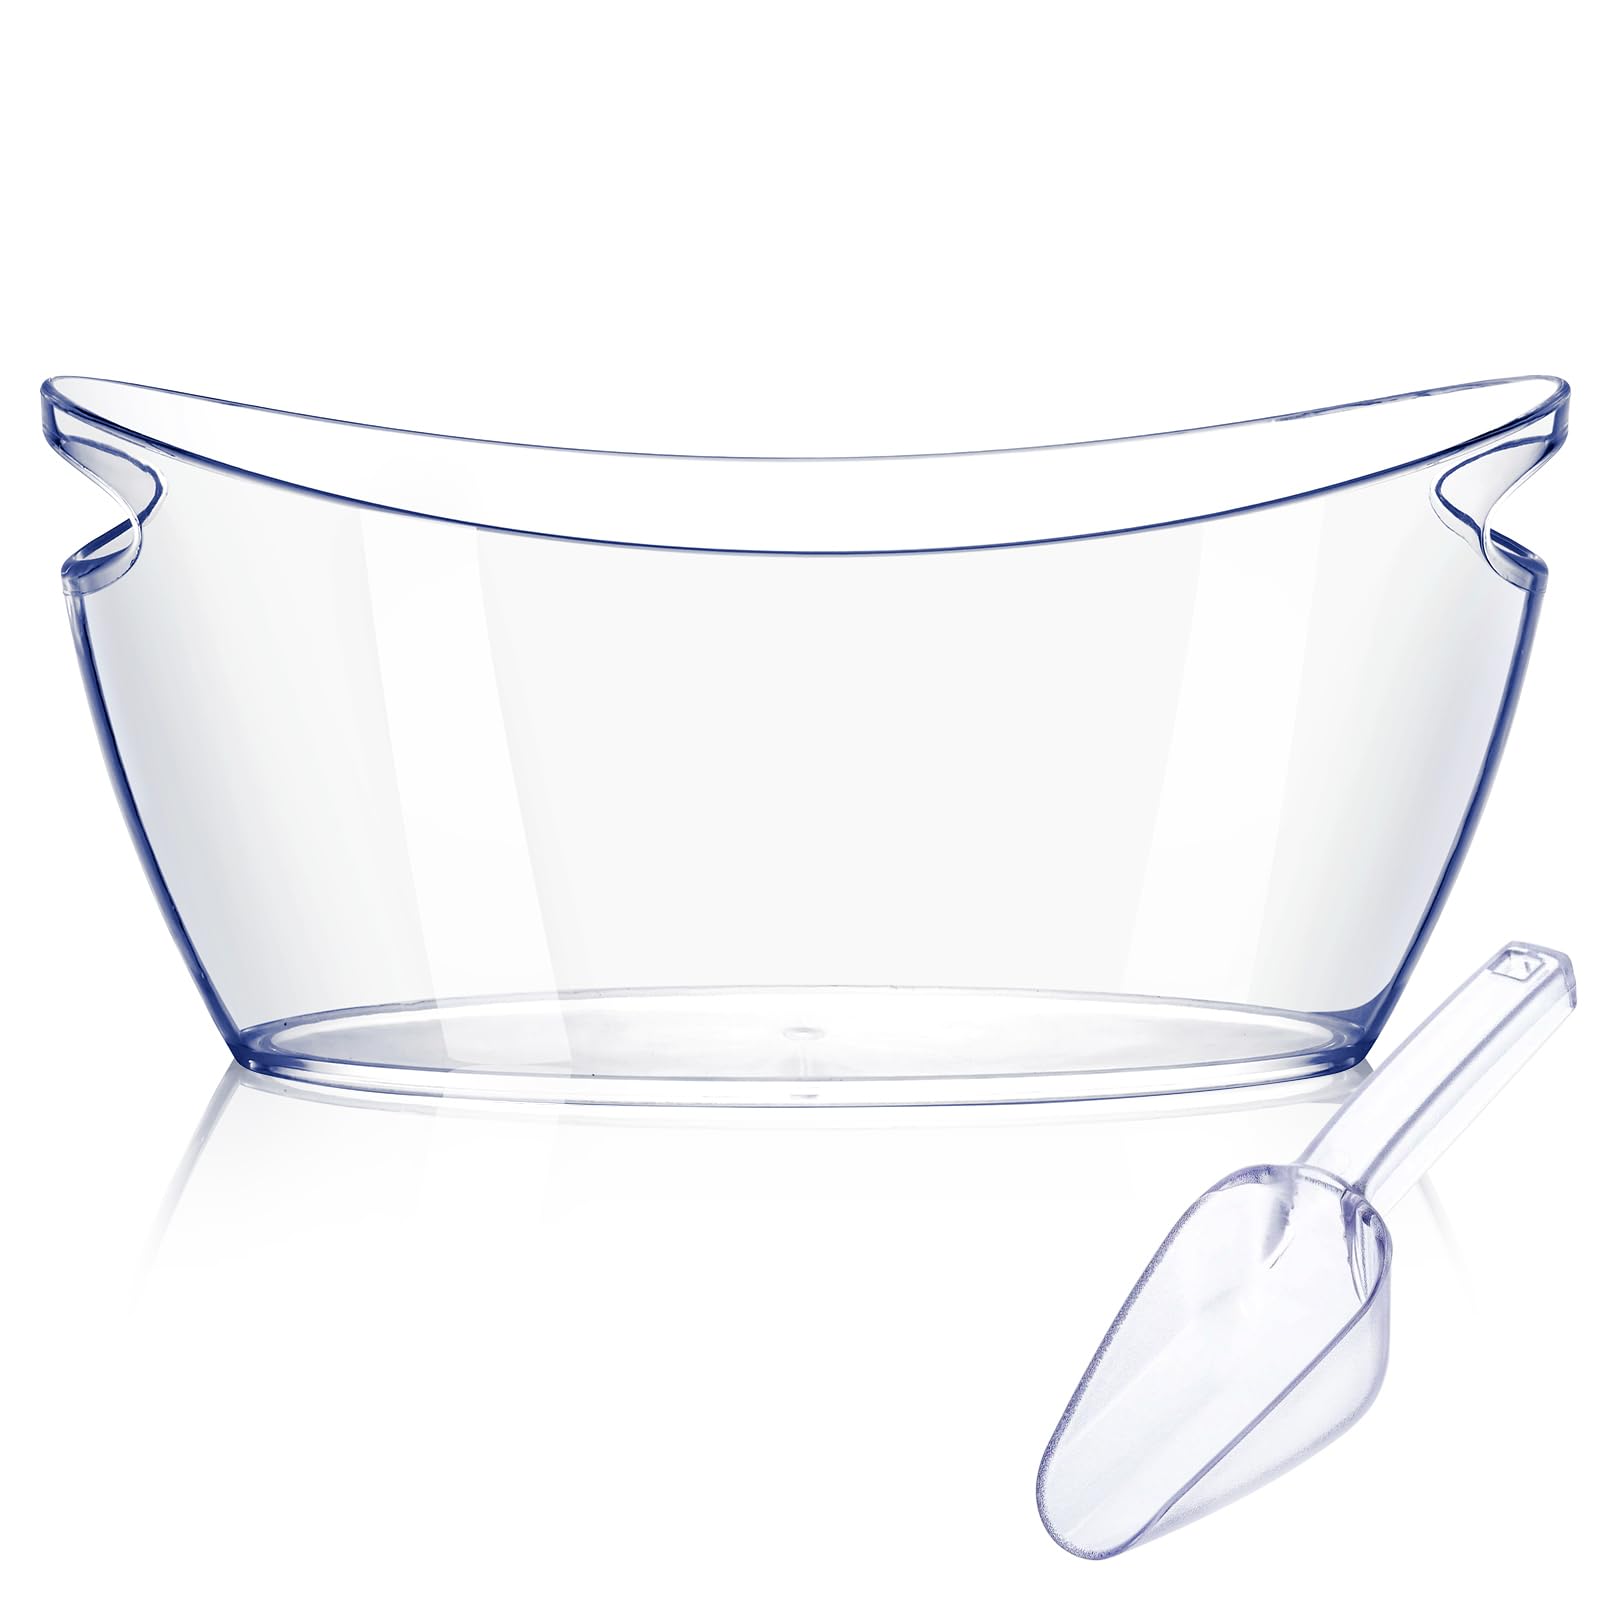 Barafat Ice Buckets for Parties (5.5L)& Ice Bucket Scoop, Clear Acrylic Champagne Bucket, Drinks Beverage Tub for Cocktail Bar, Wine, Beer, Soda